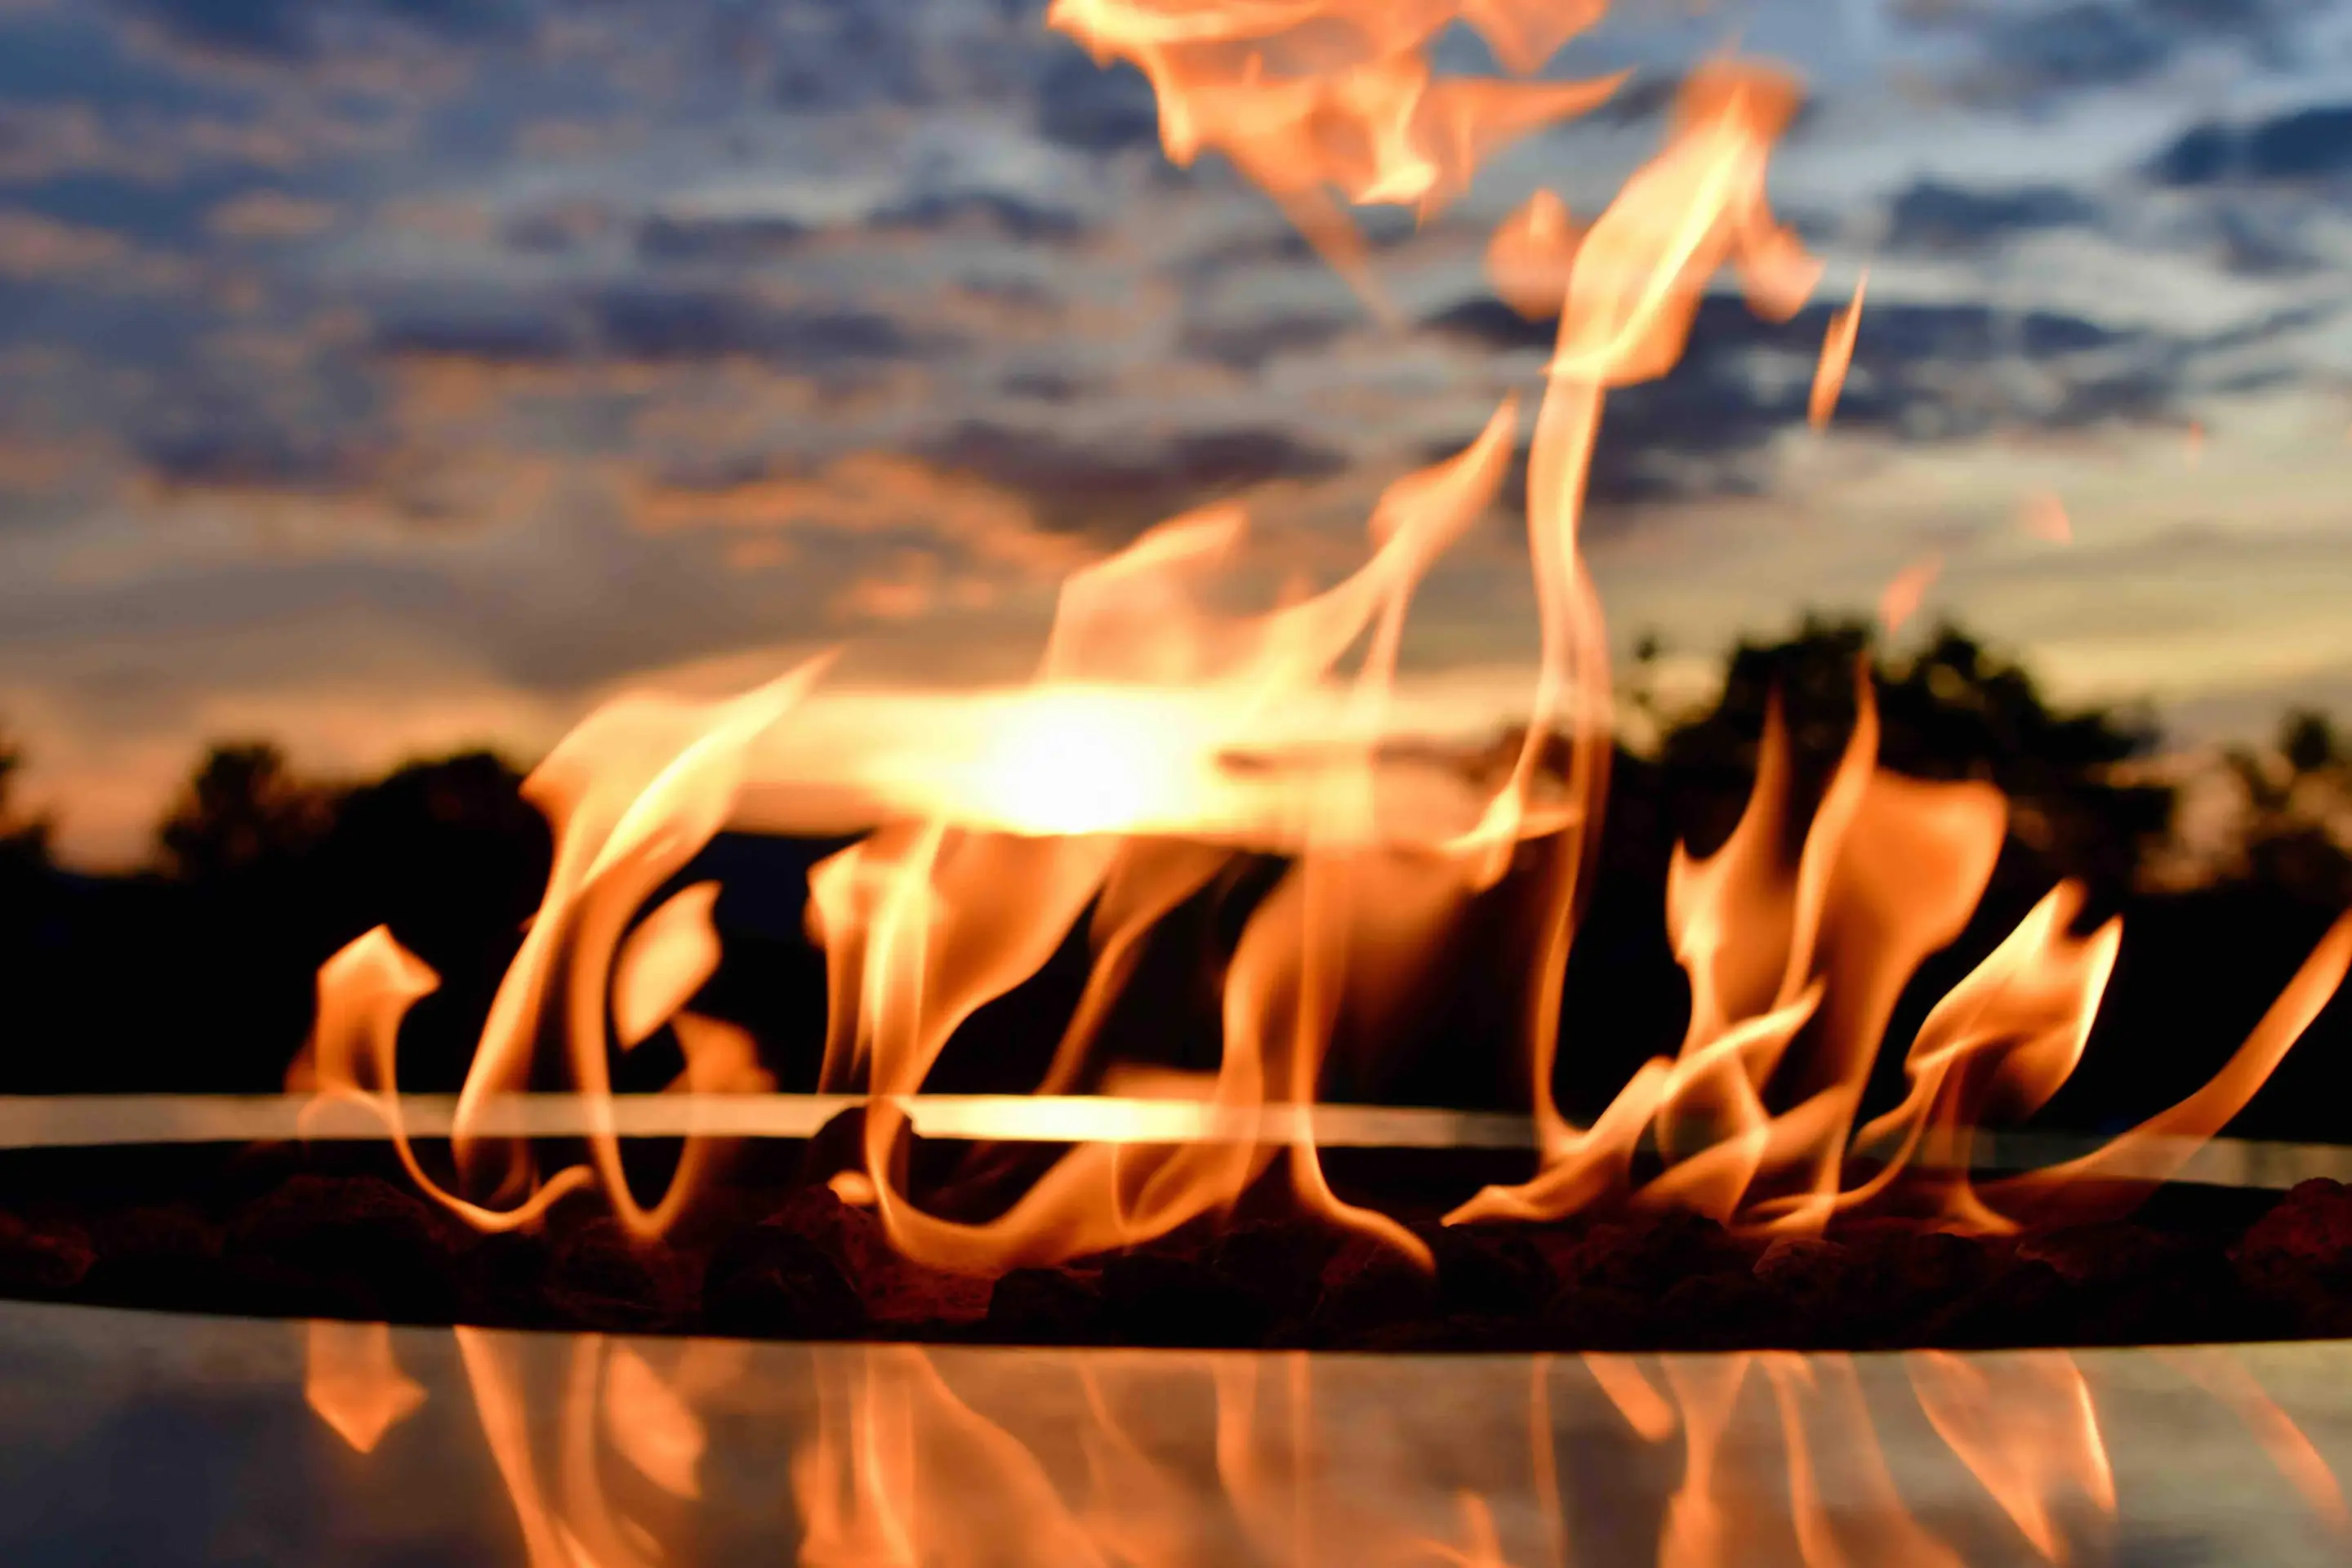 A fire in a firepit set against a background of trees at sunset